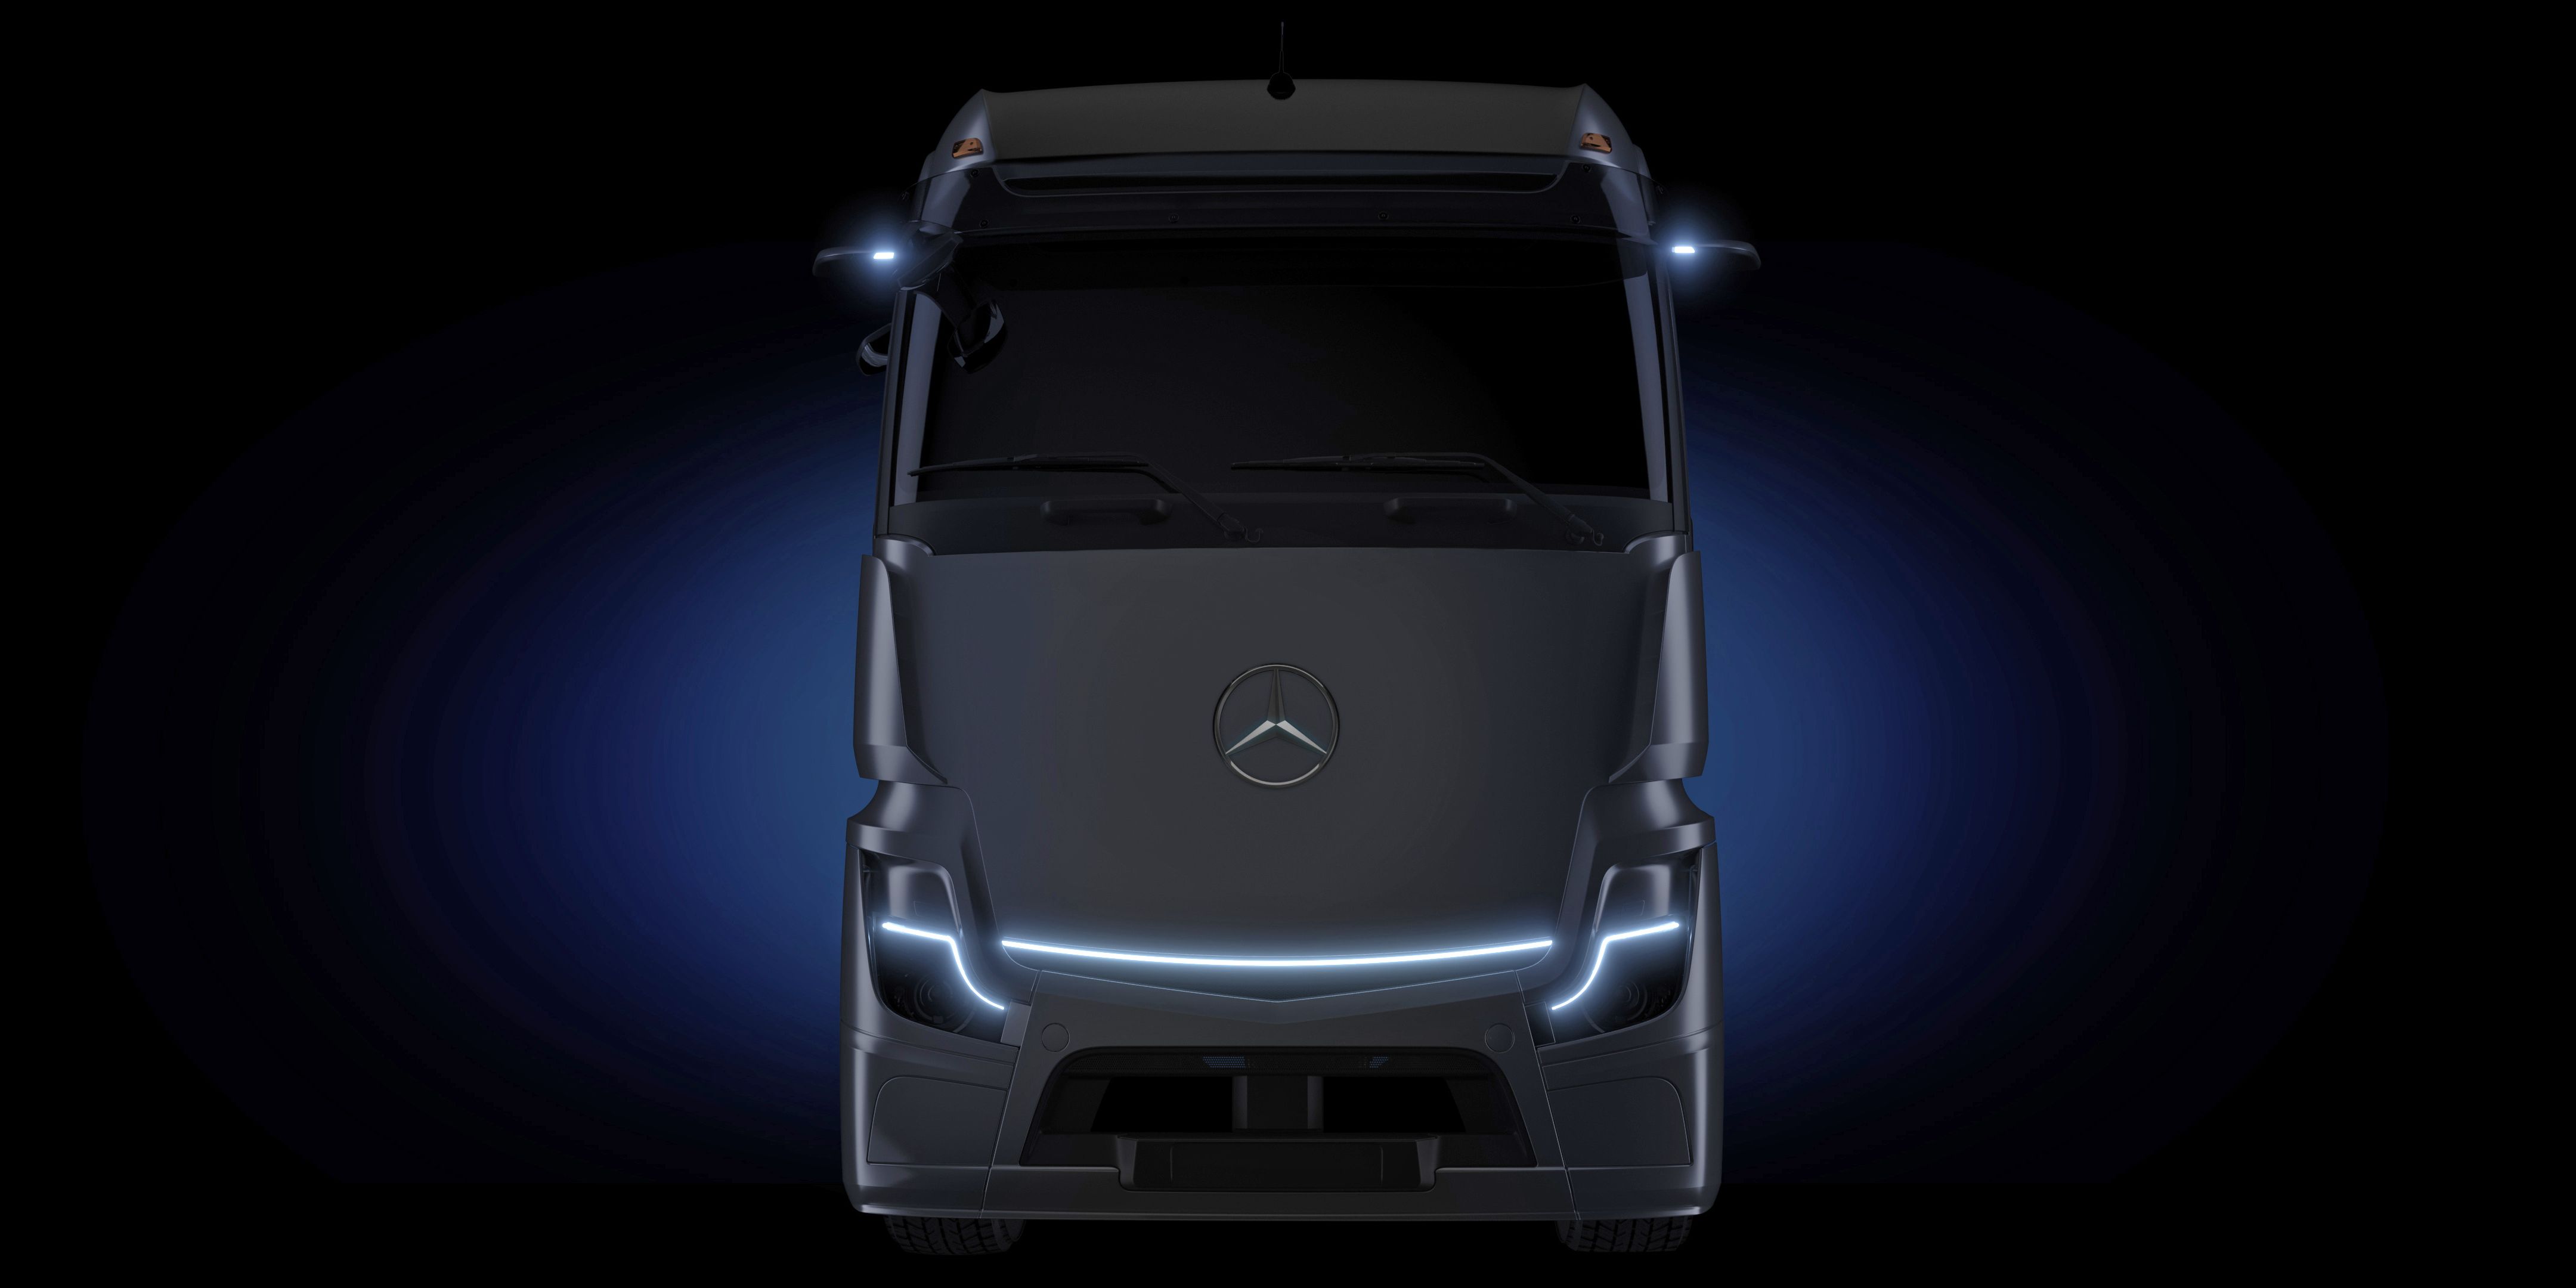 Mercedes Will Unveil eActros LongHaul Electric Semi at IAA in Hannover